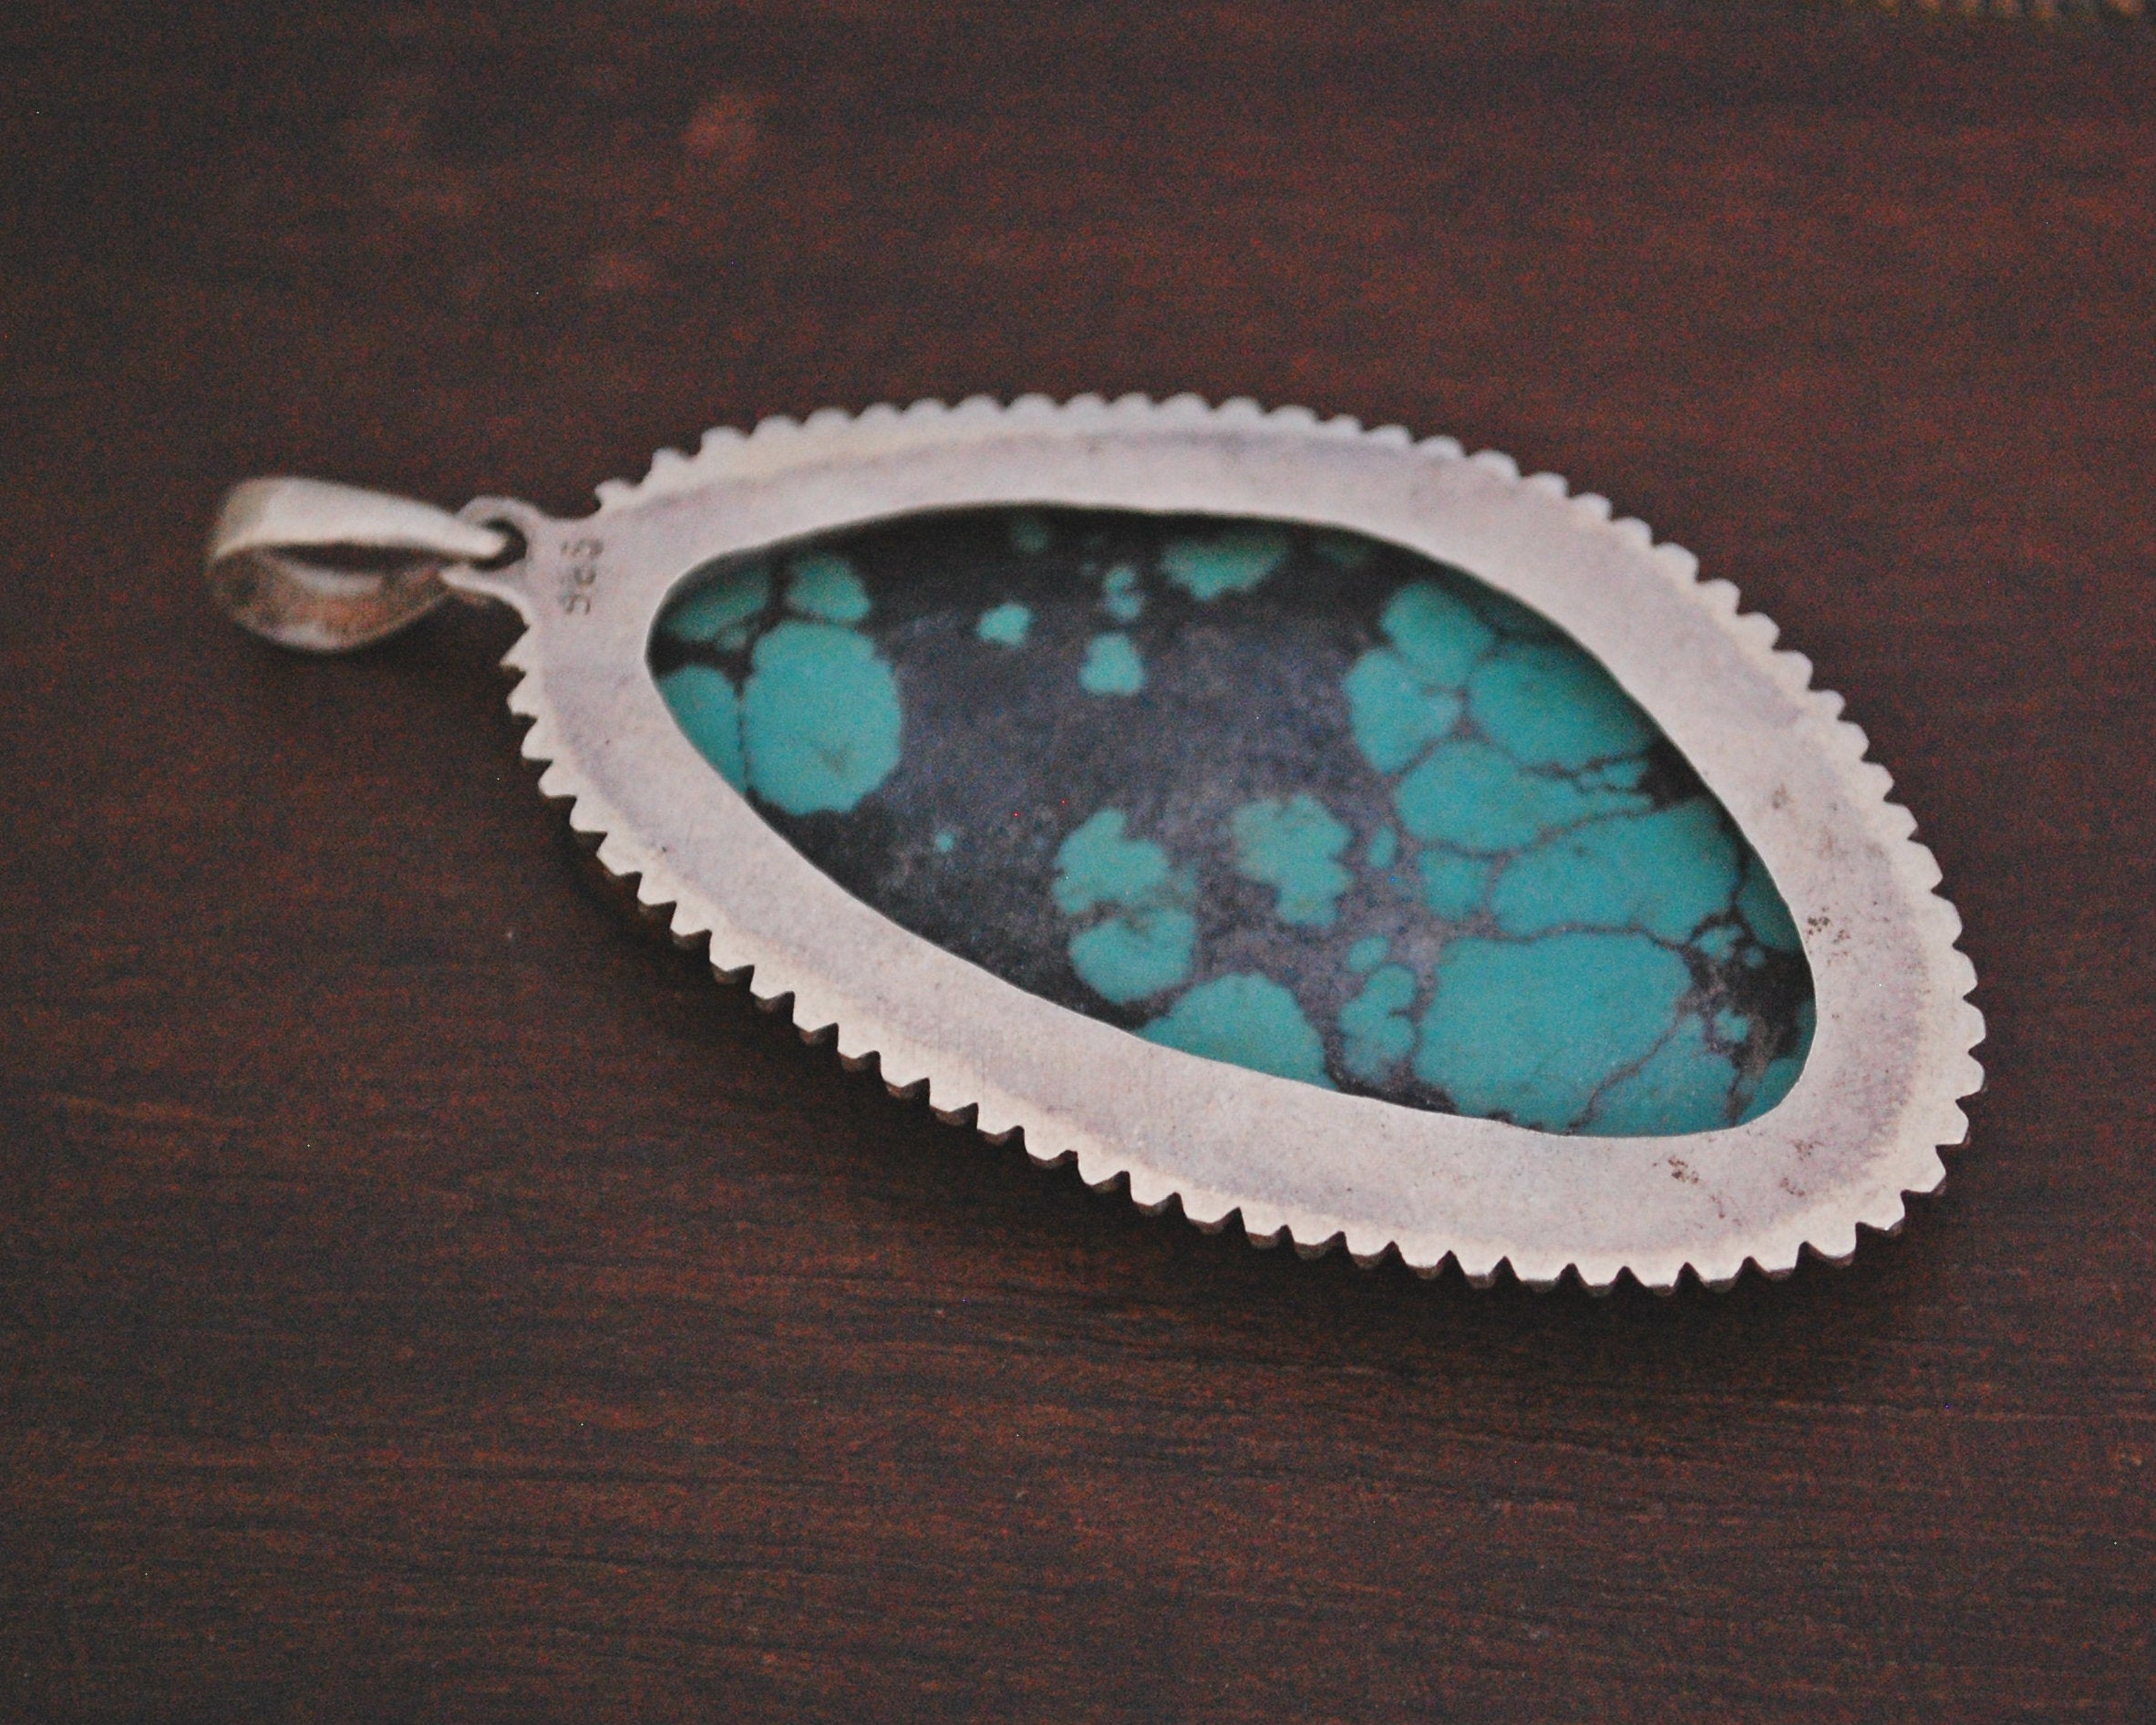 Large Turquoise Pendant from India